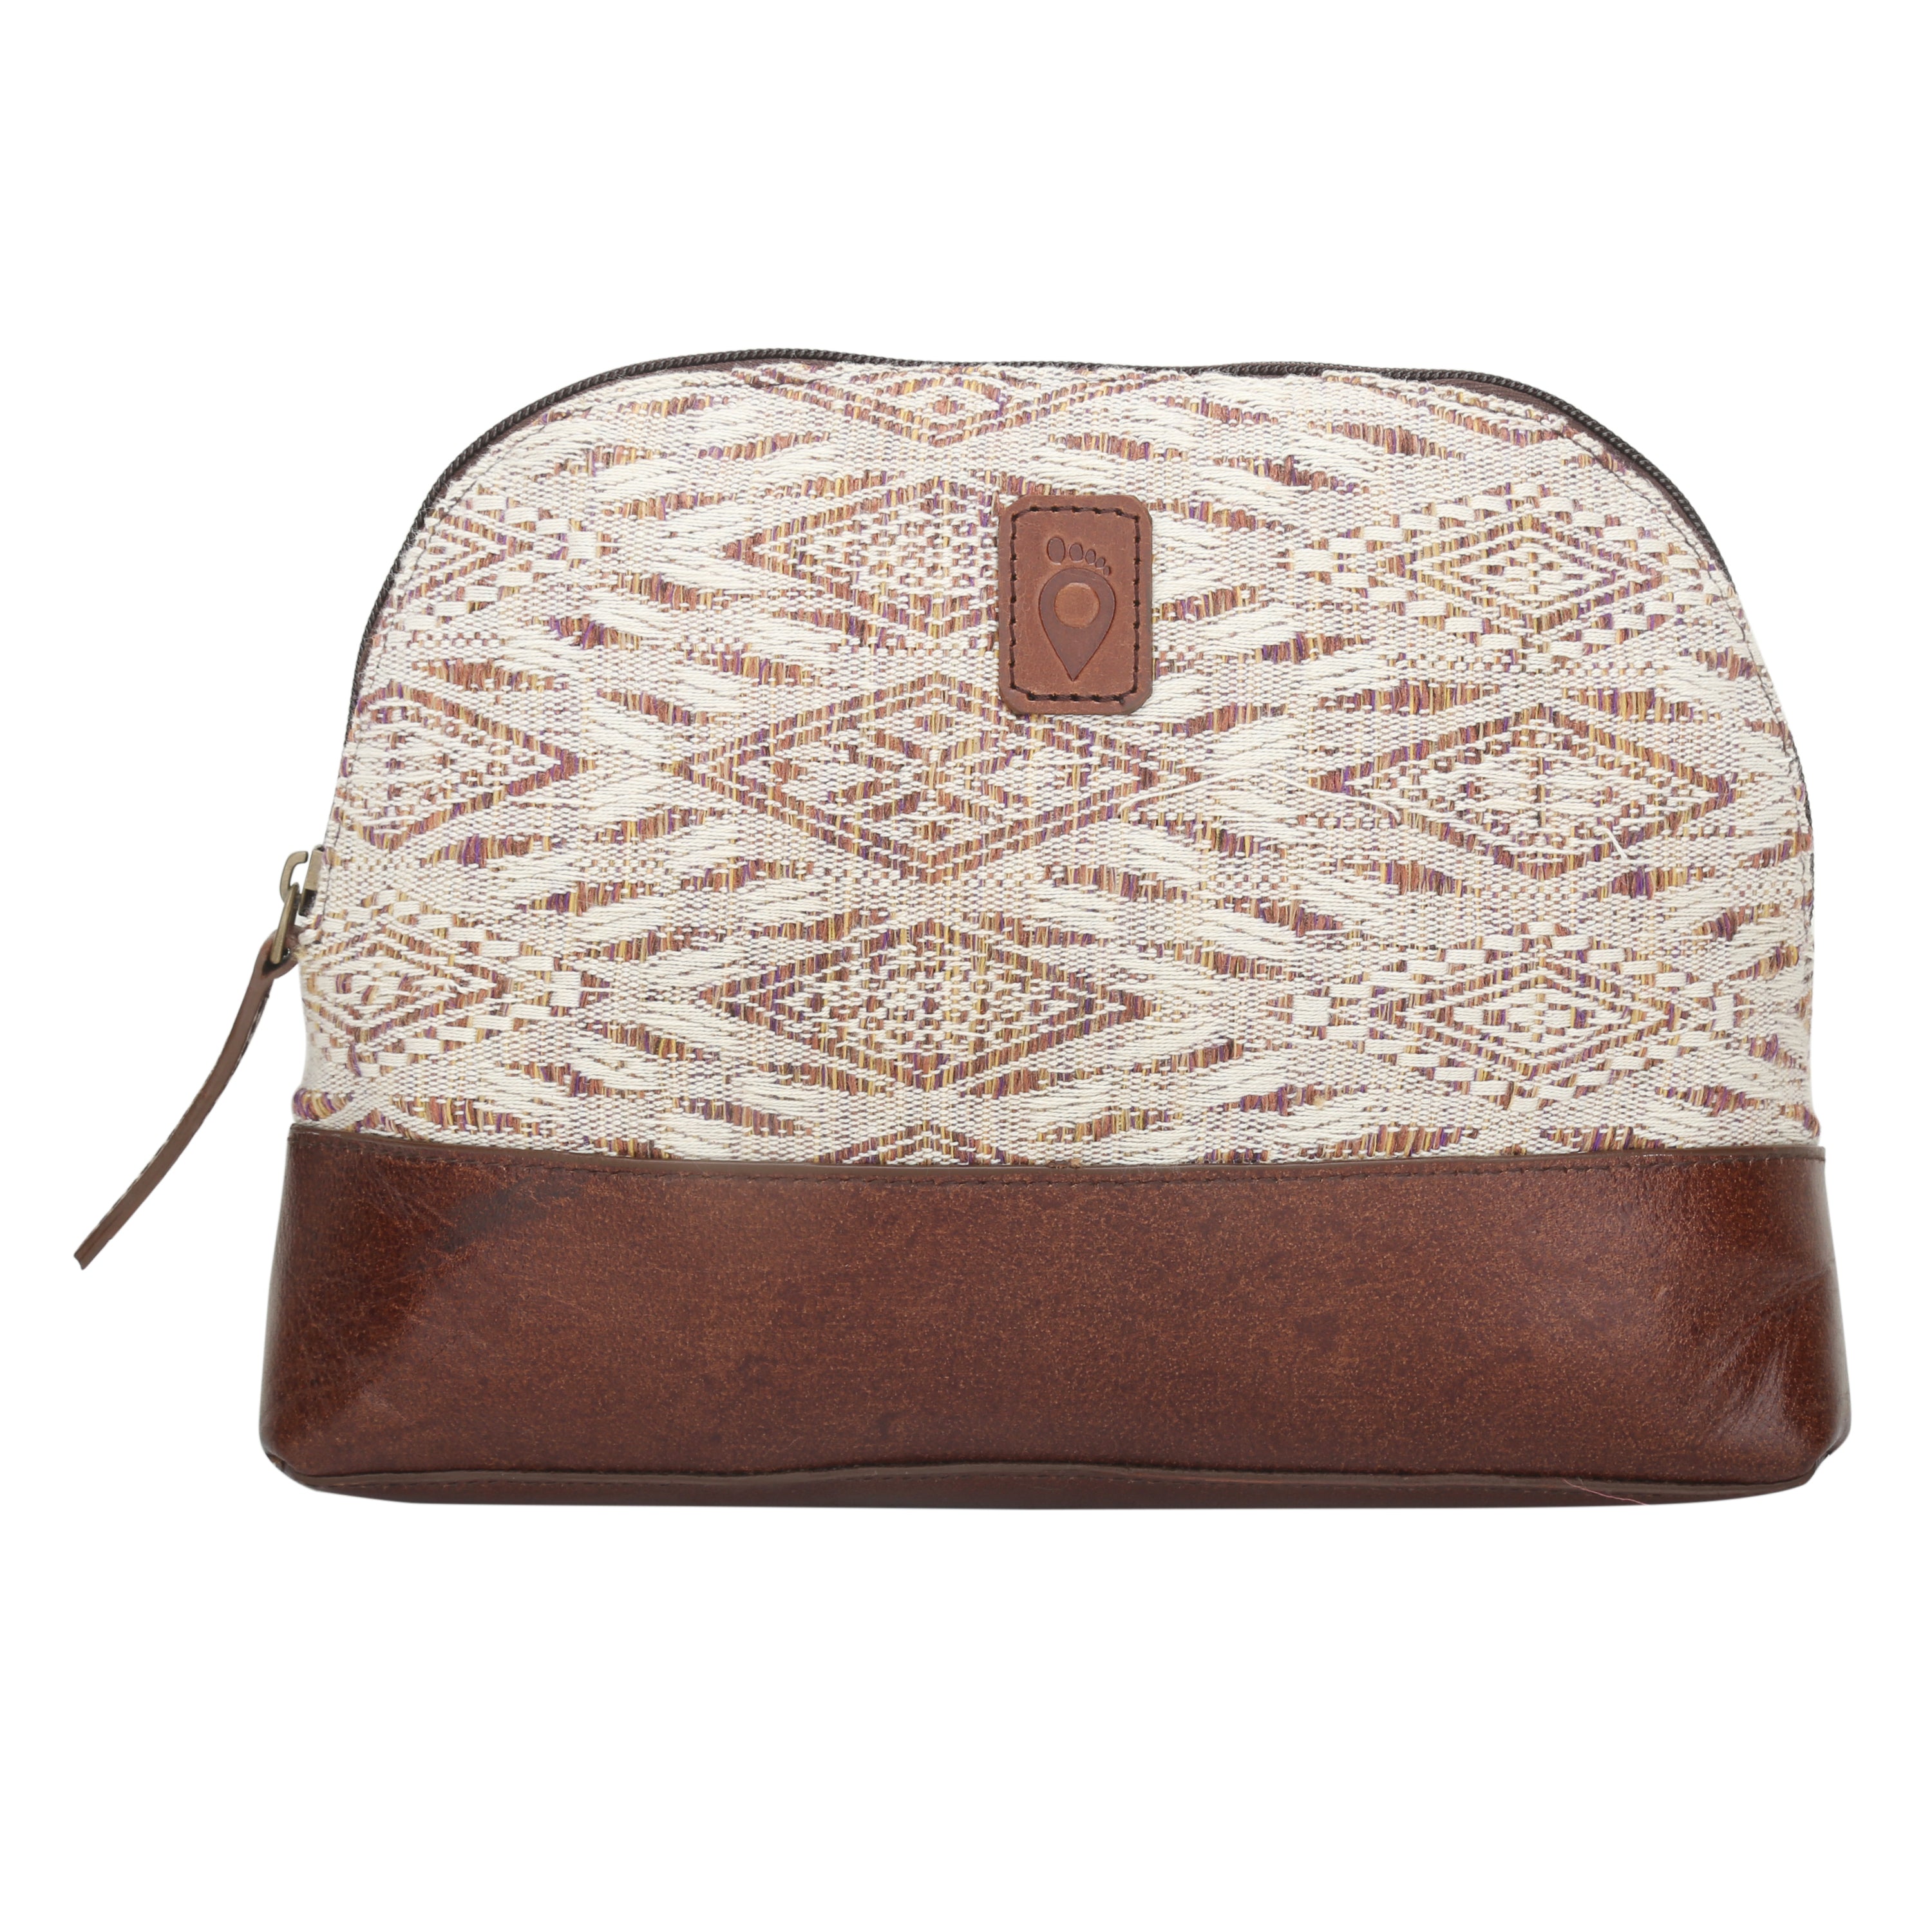 Woven Patterned Clutch | Brown and Cream